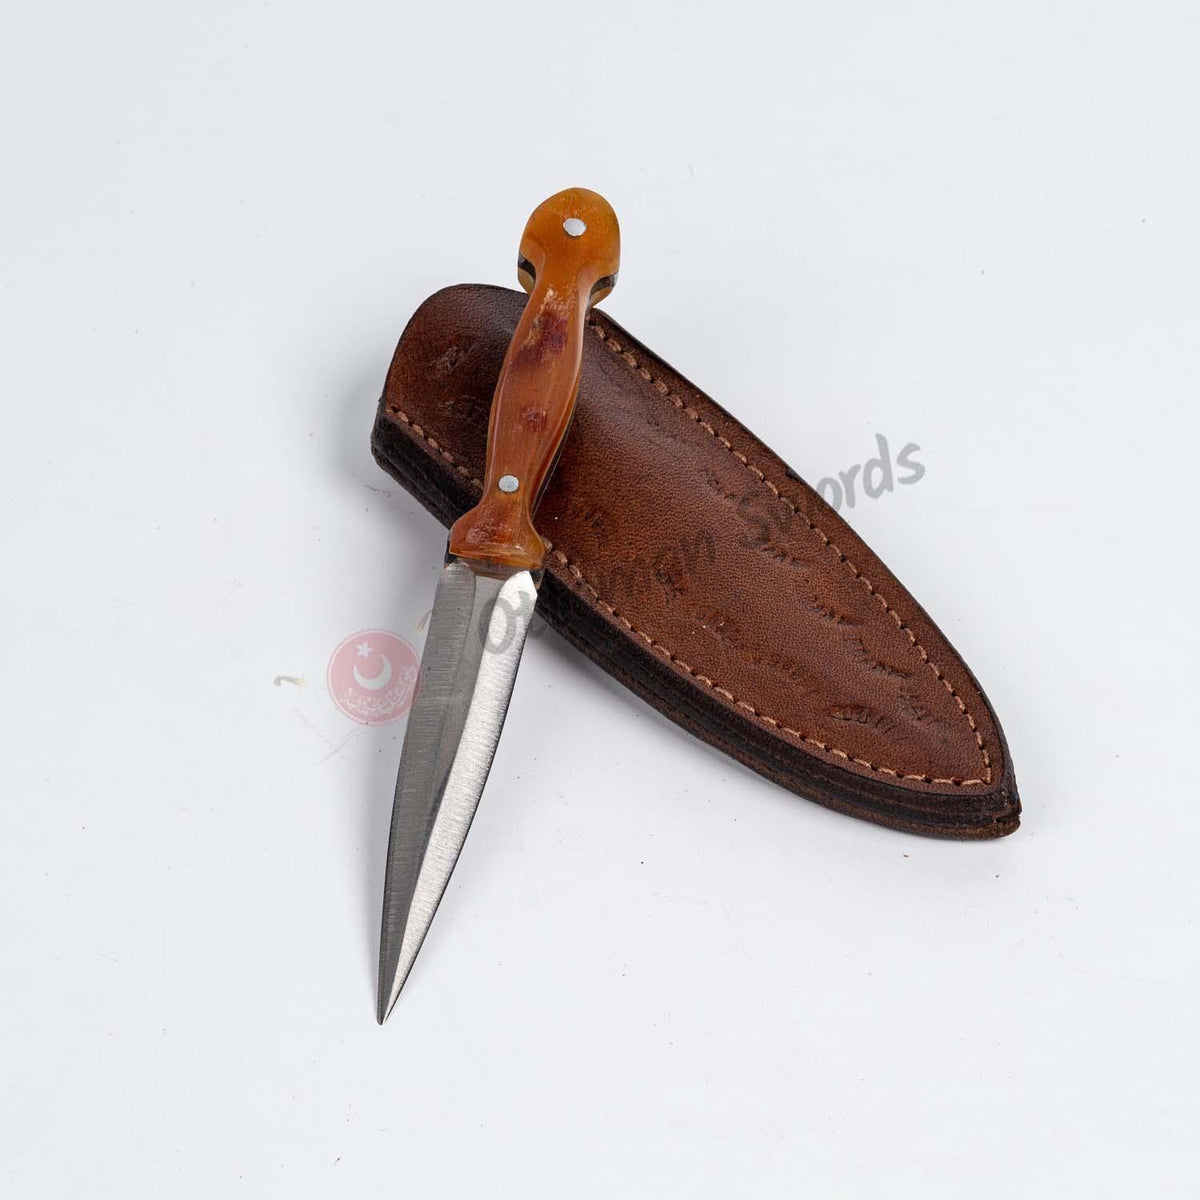 Small Double Edged Dagger Knife (2)